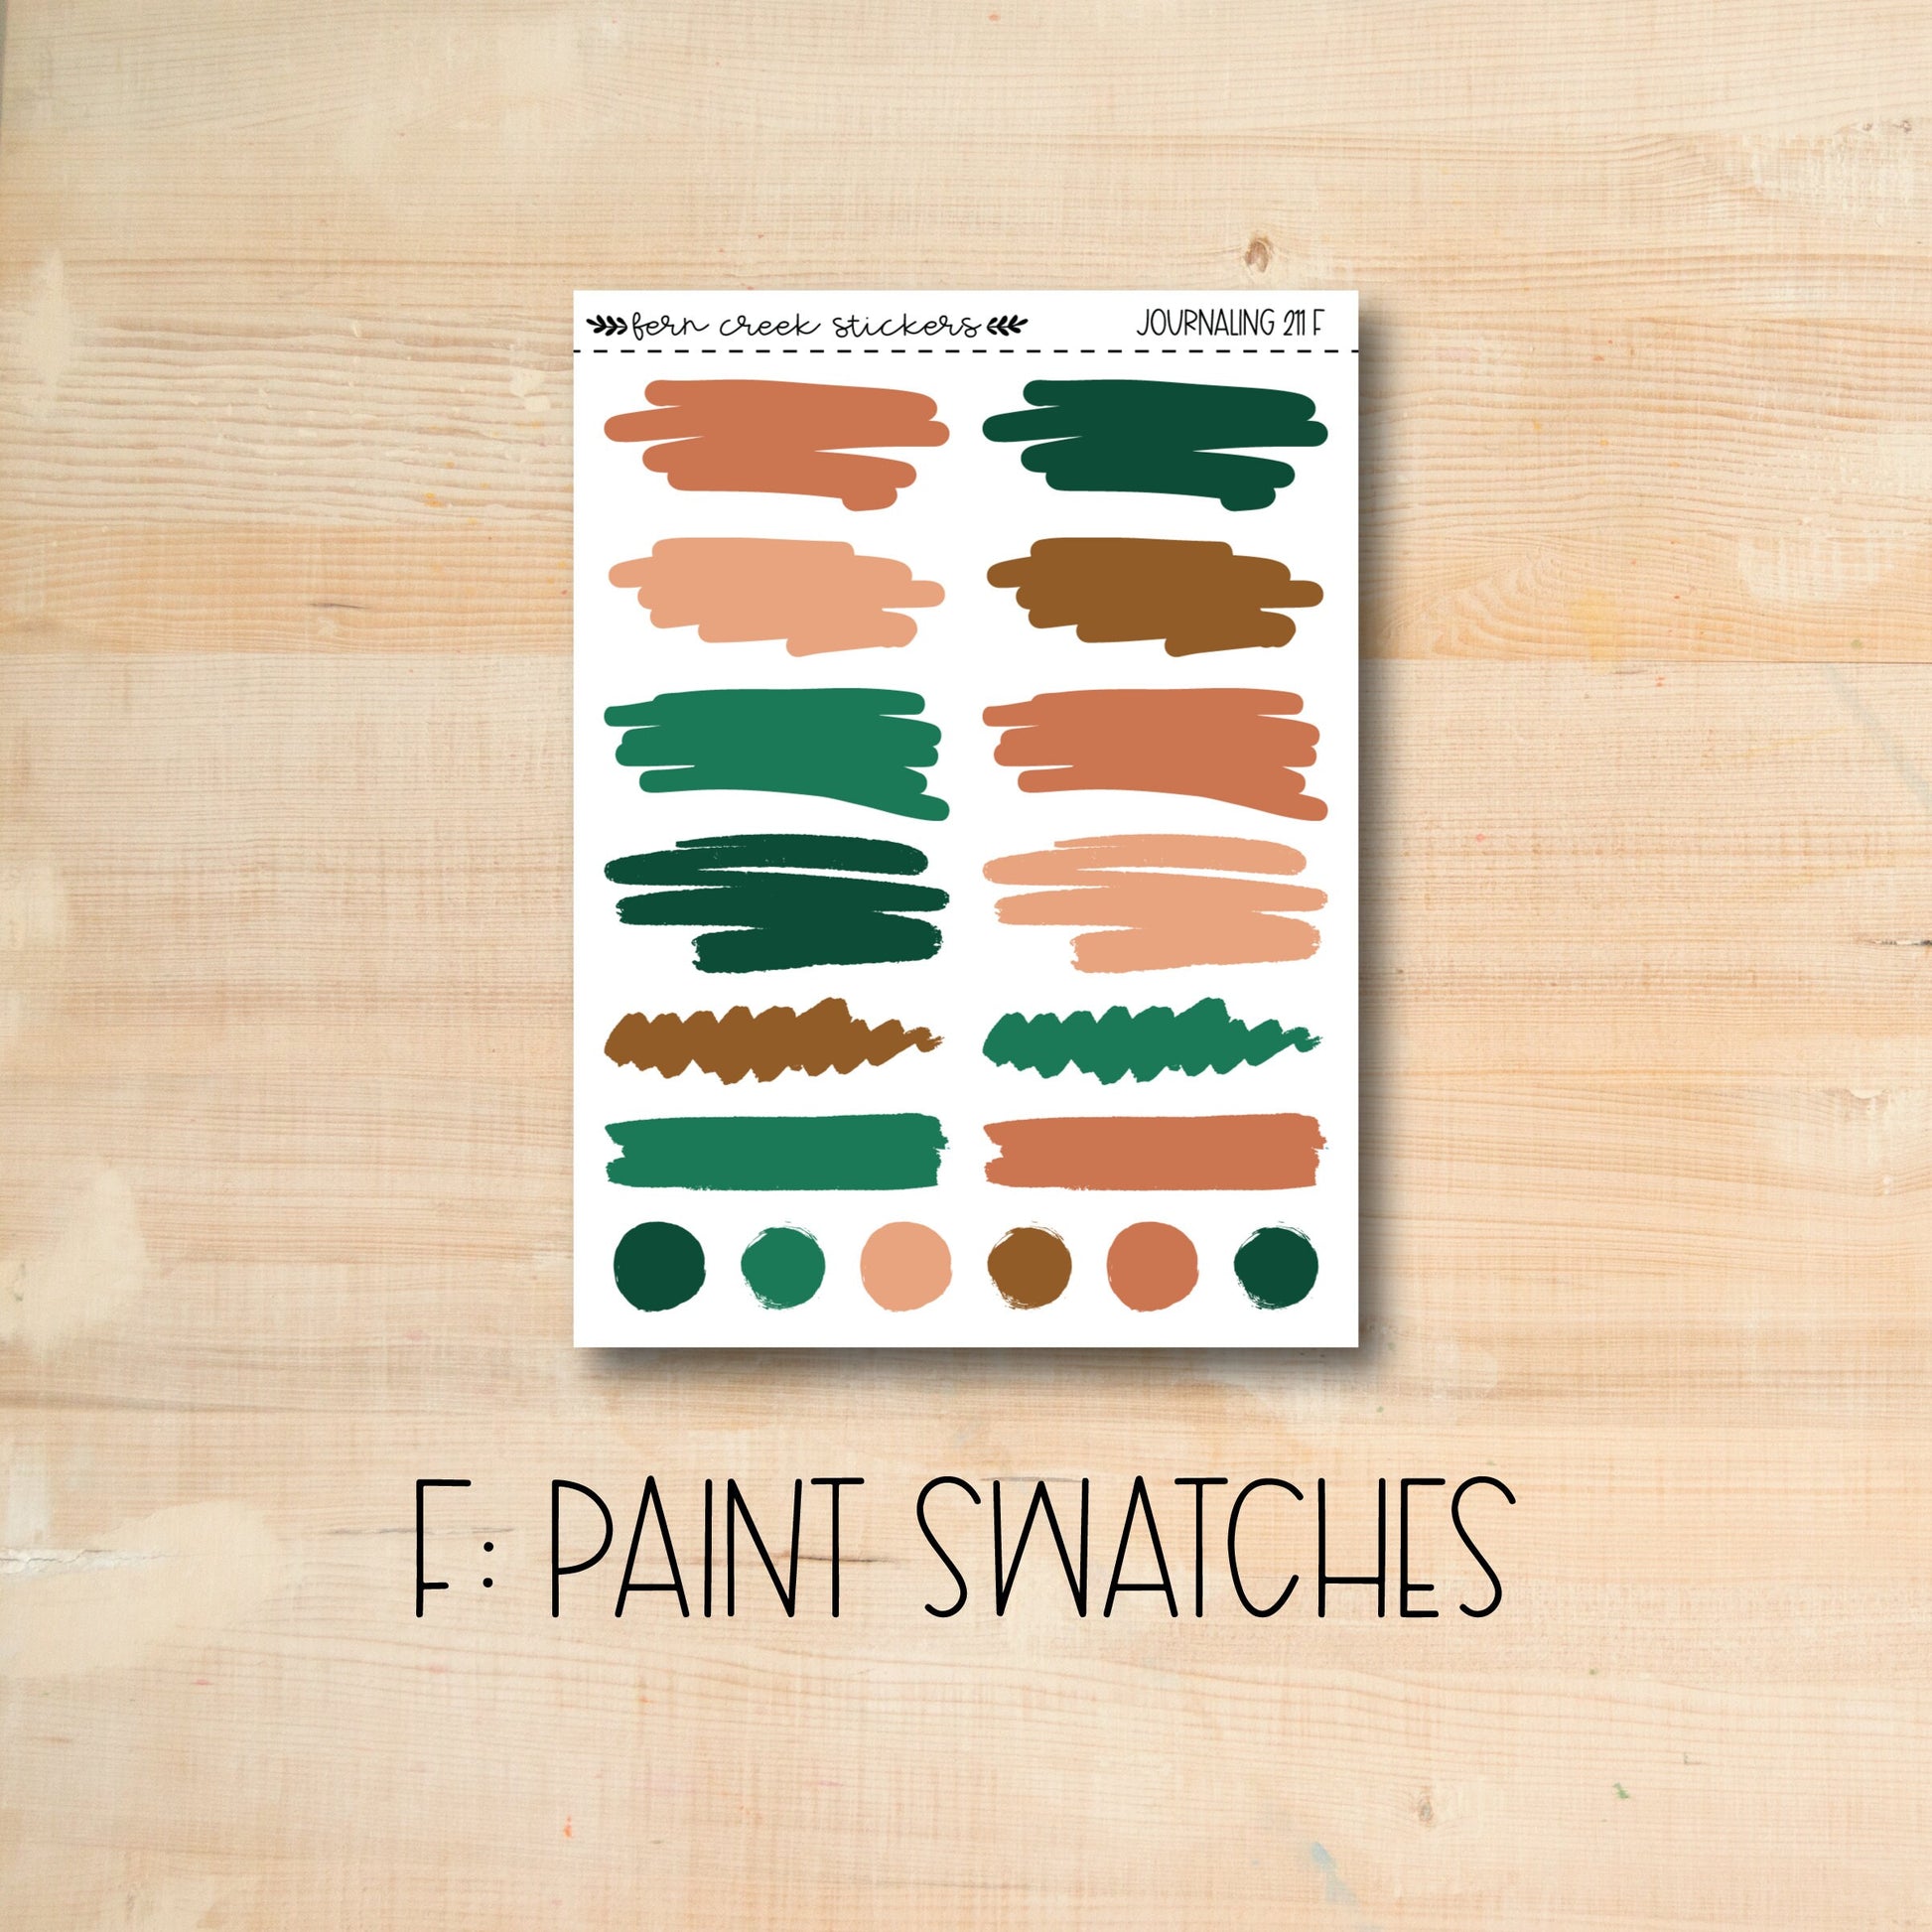 a picture of a wooden table with paint swatches